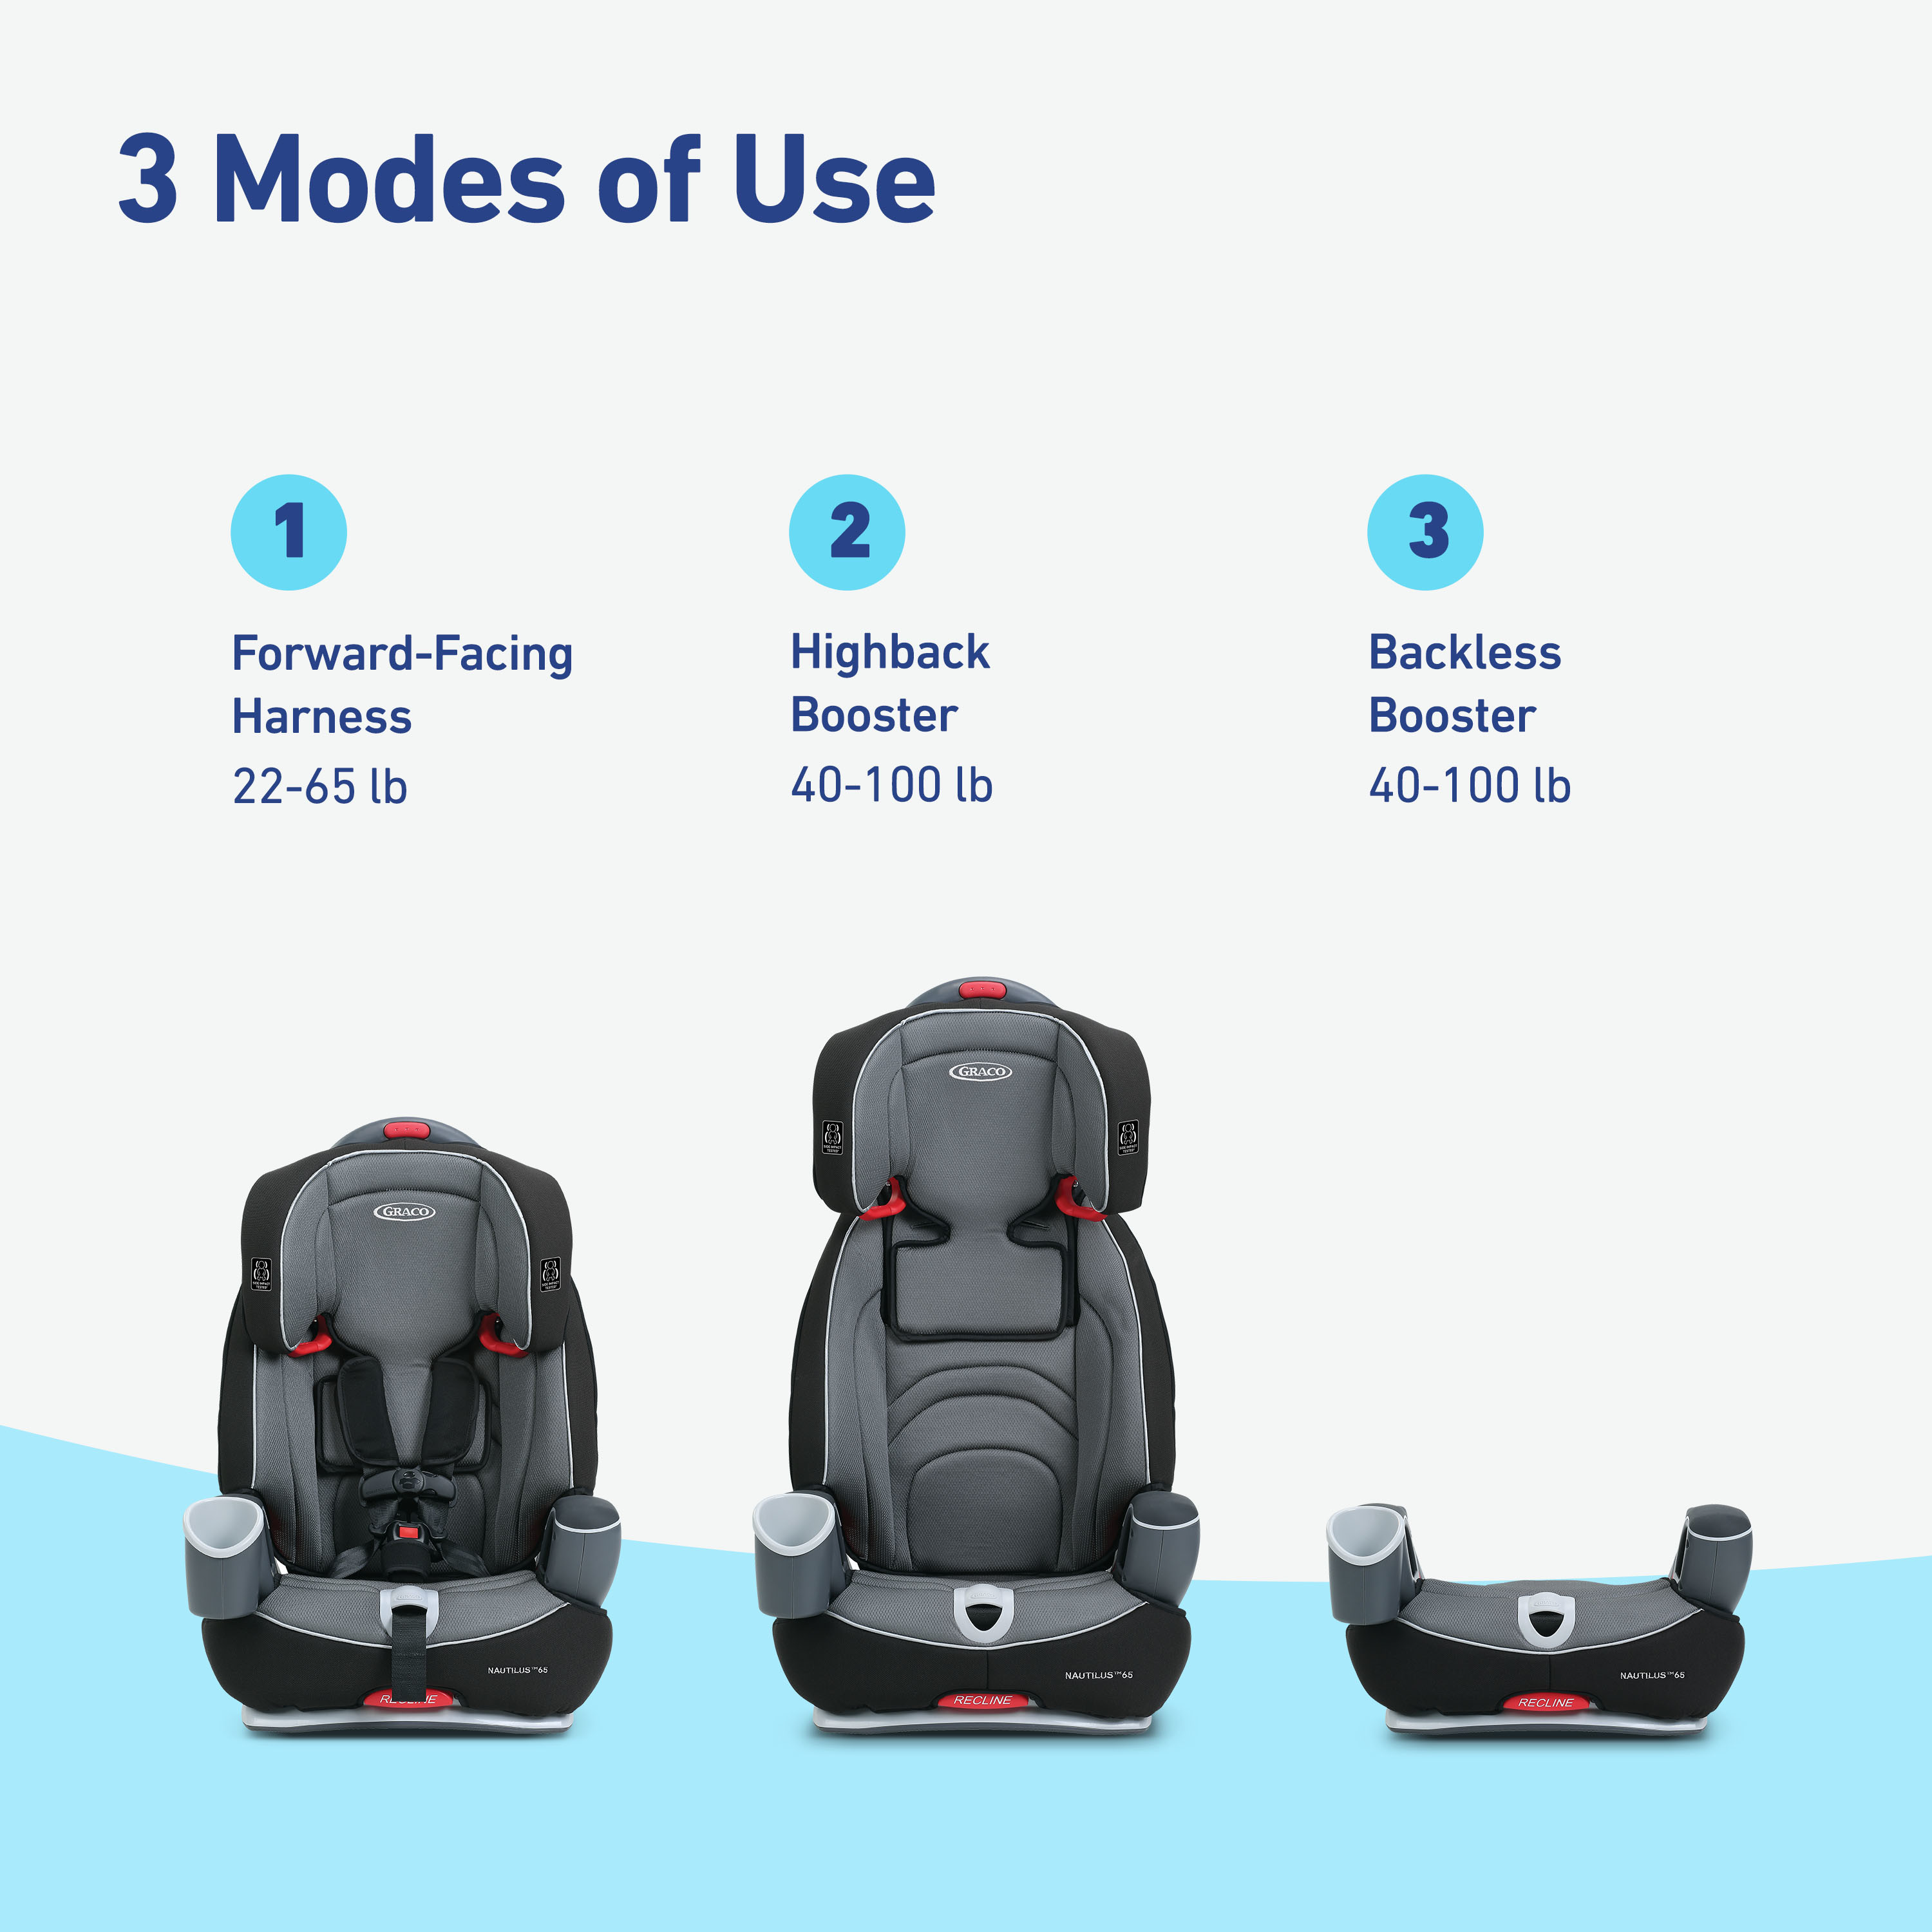 Graco Nautilus 65 3-in-1 Harness Booster Car Seat, Bravo - image 3 of 7